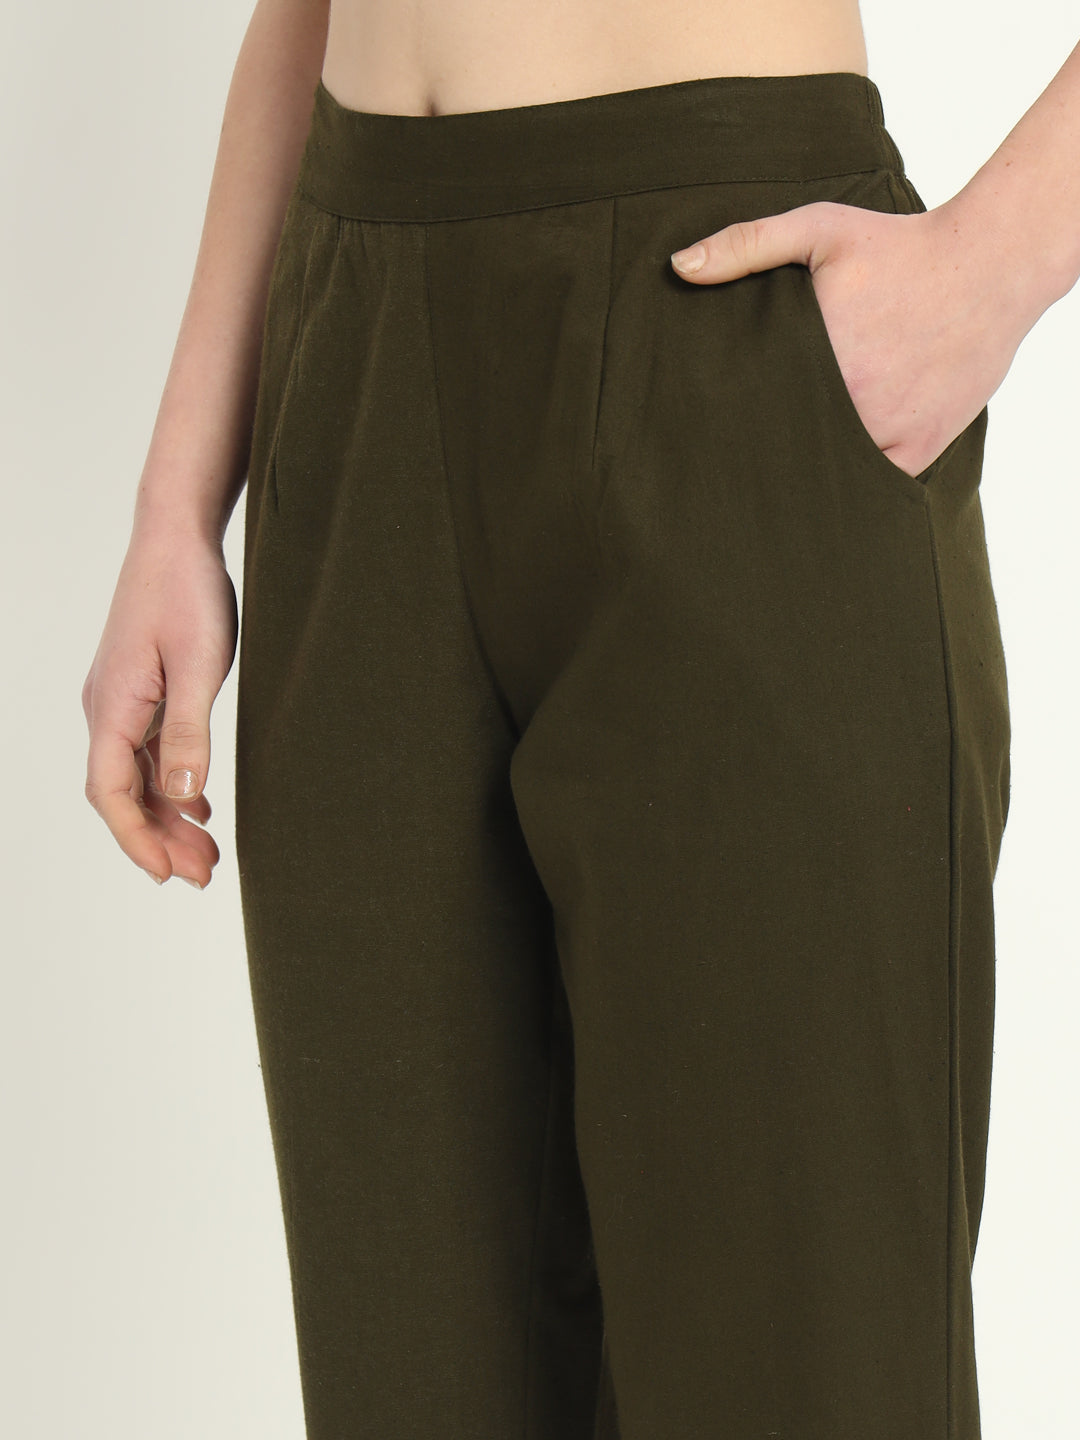 Buy Nuon Solid Green Parachute Pants from Westside